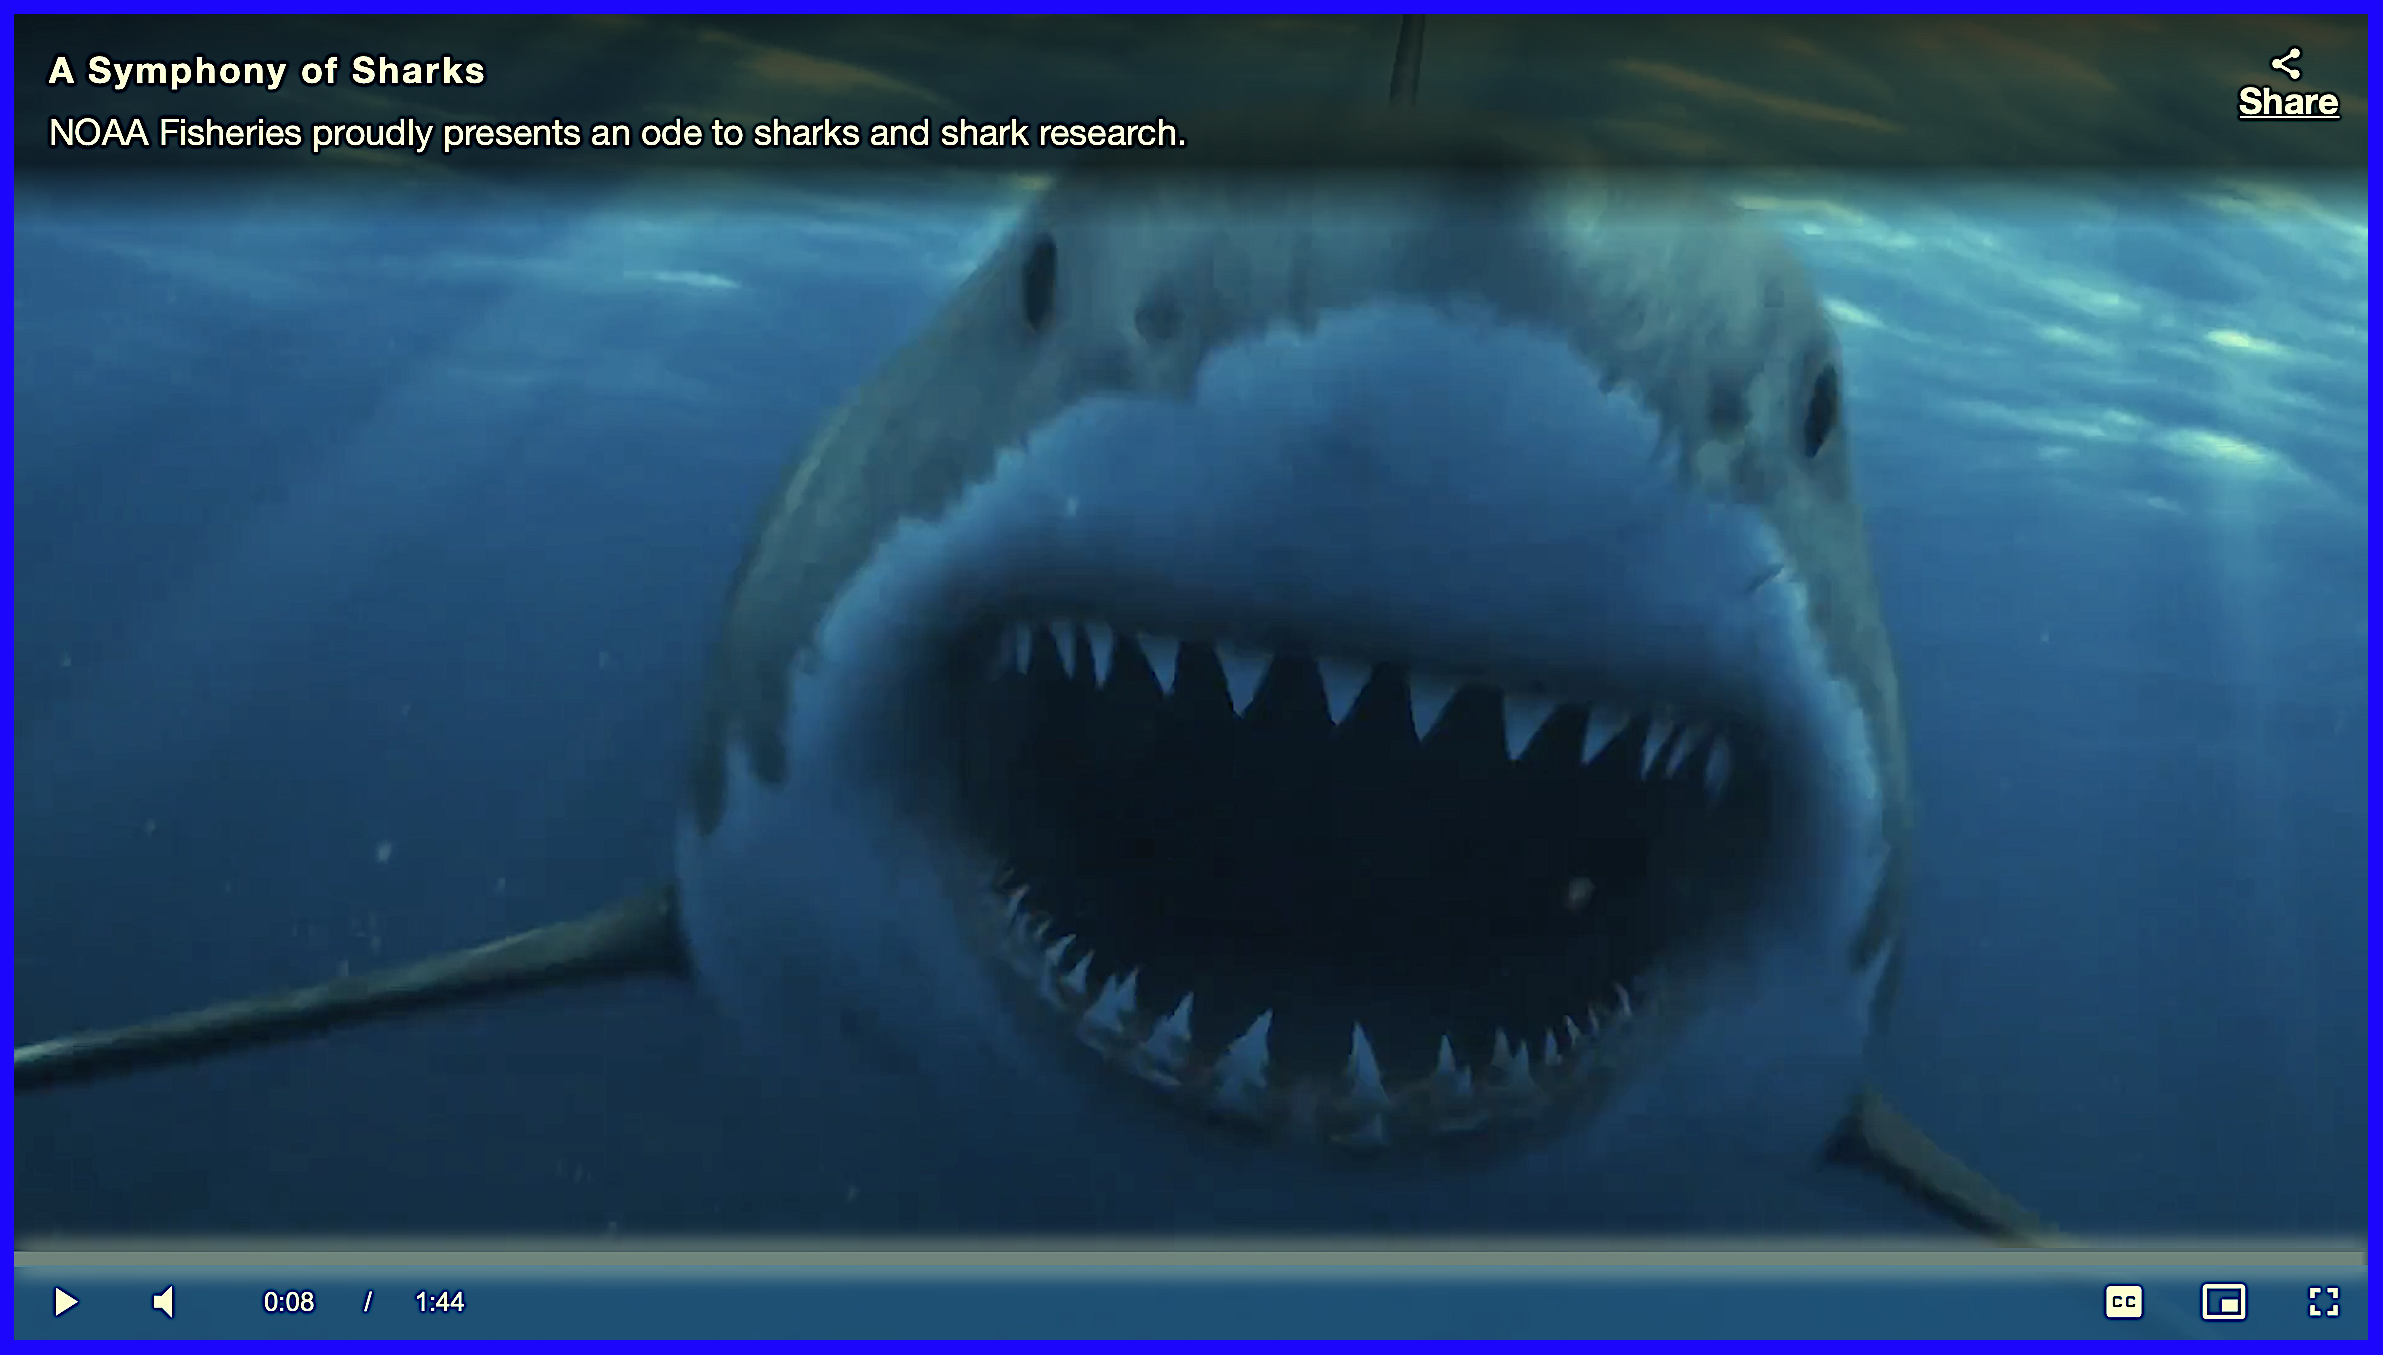 screenshot for video. click to play NOAA Fisheries' "ode to sharks and shark research."